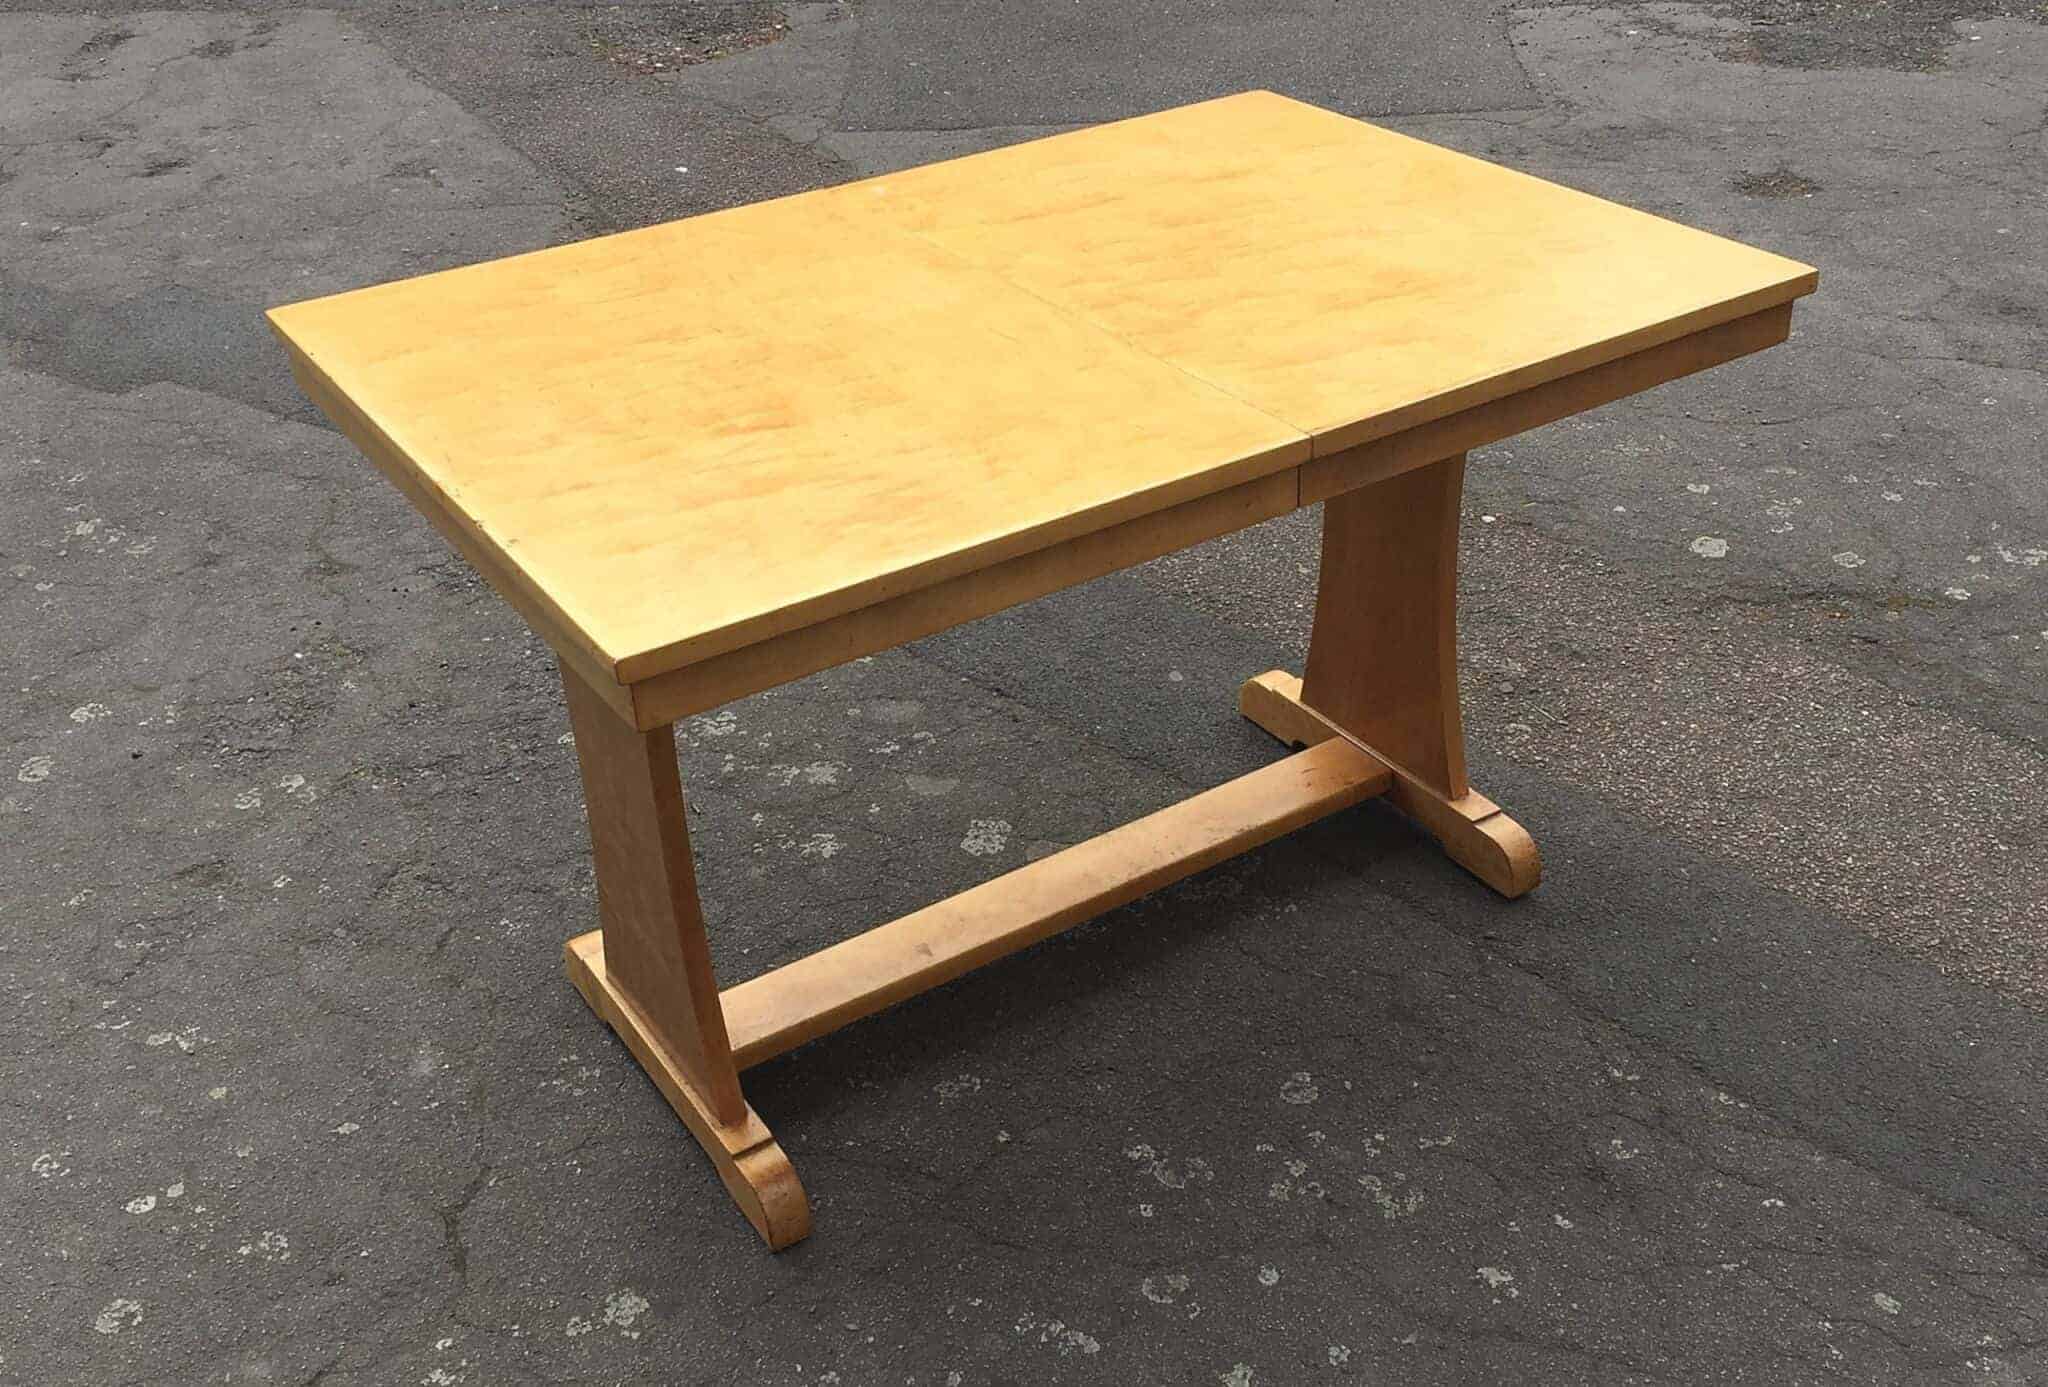 A 1930's Art Deco satin birch dining table with an extra leaf